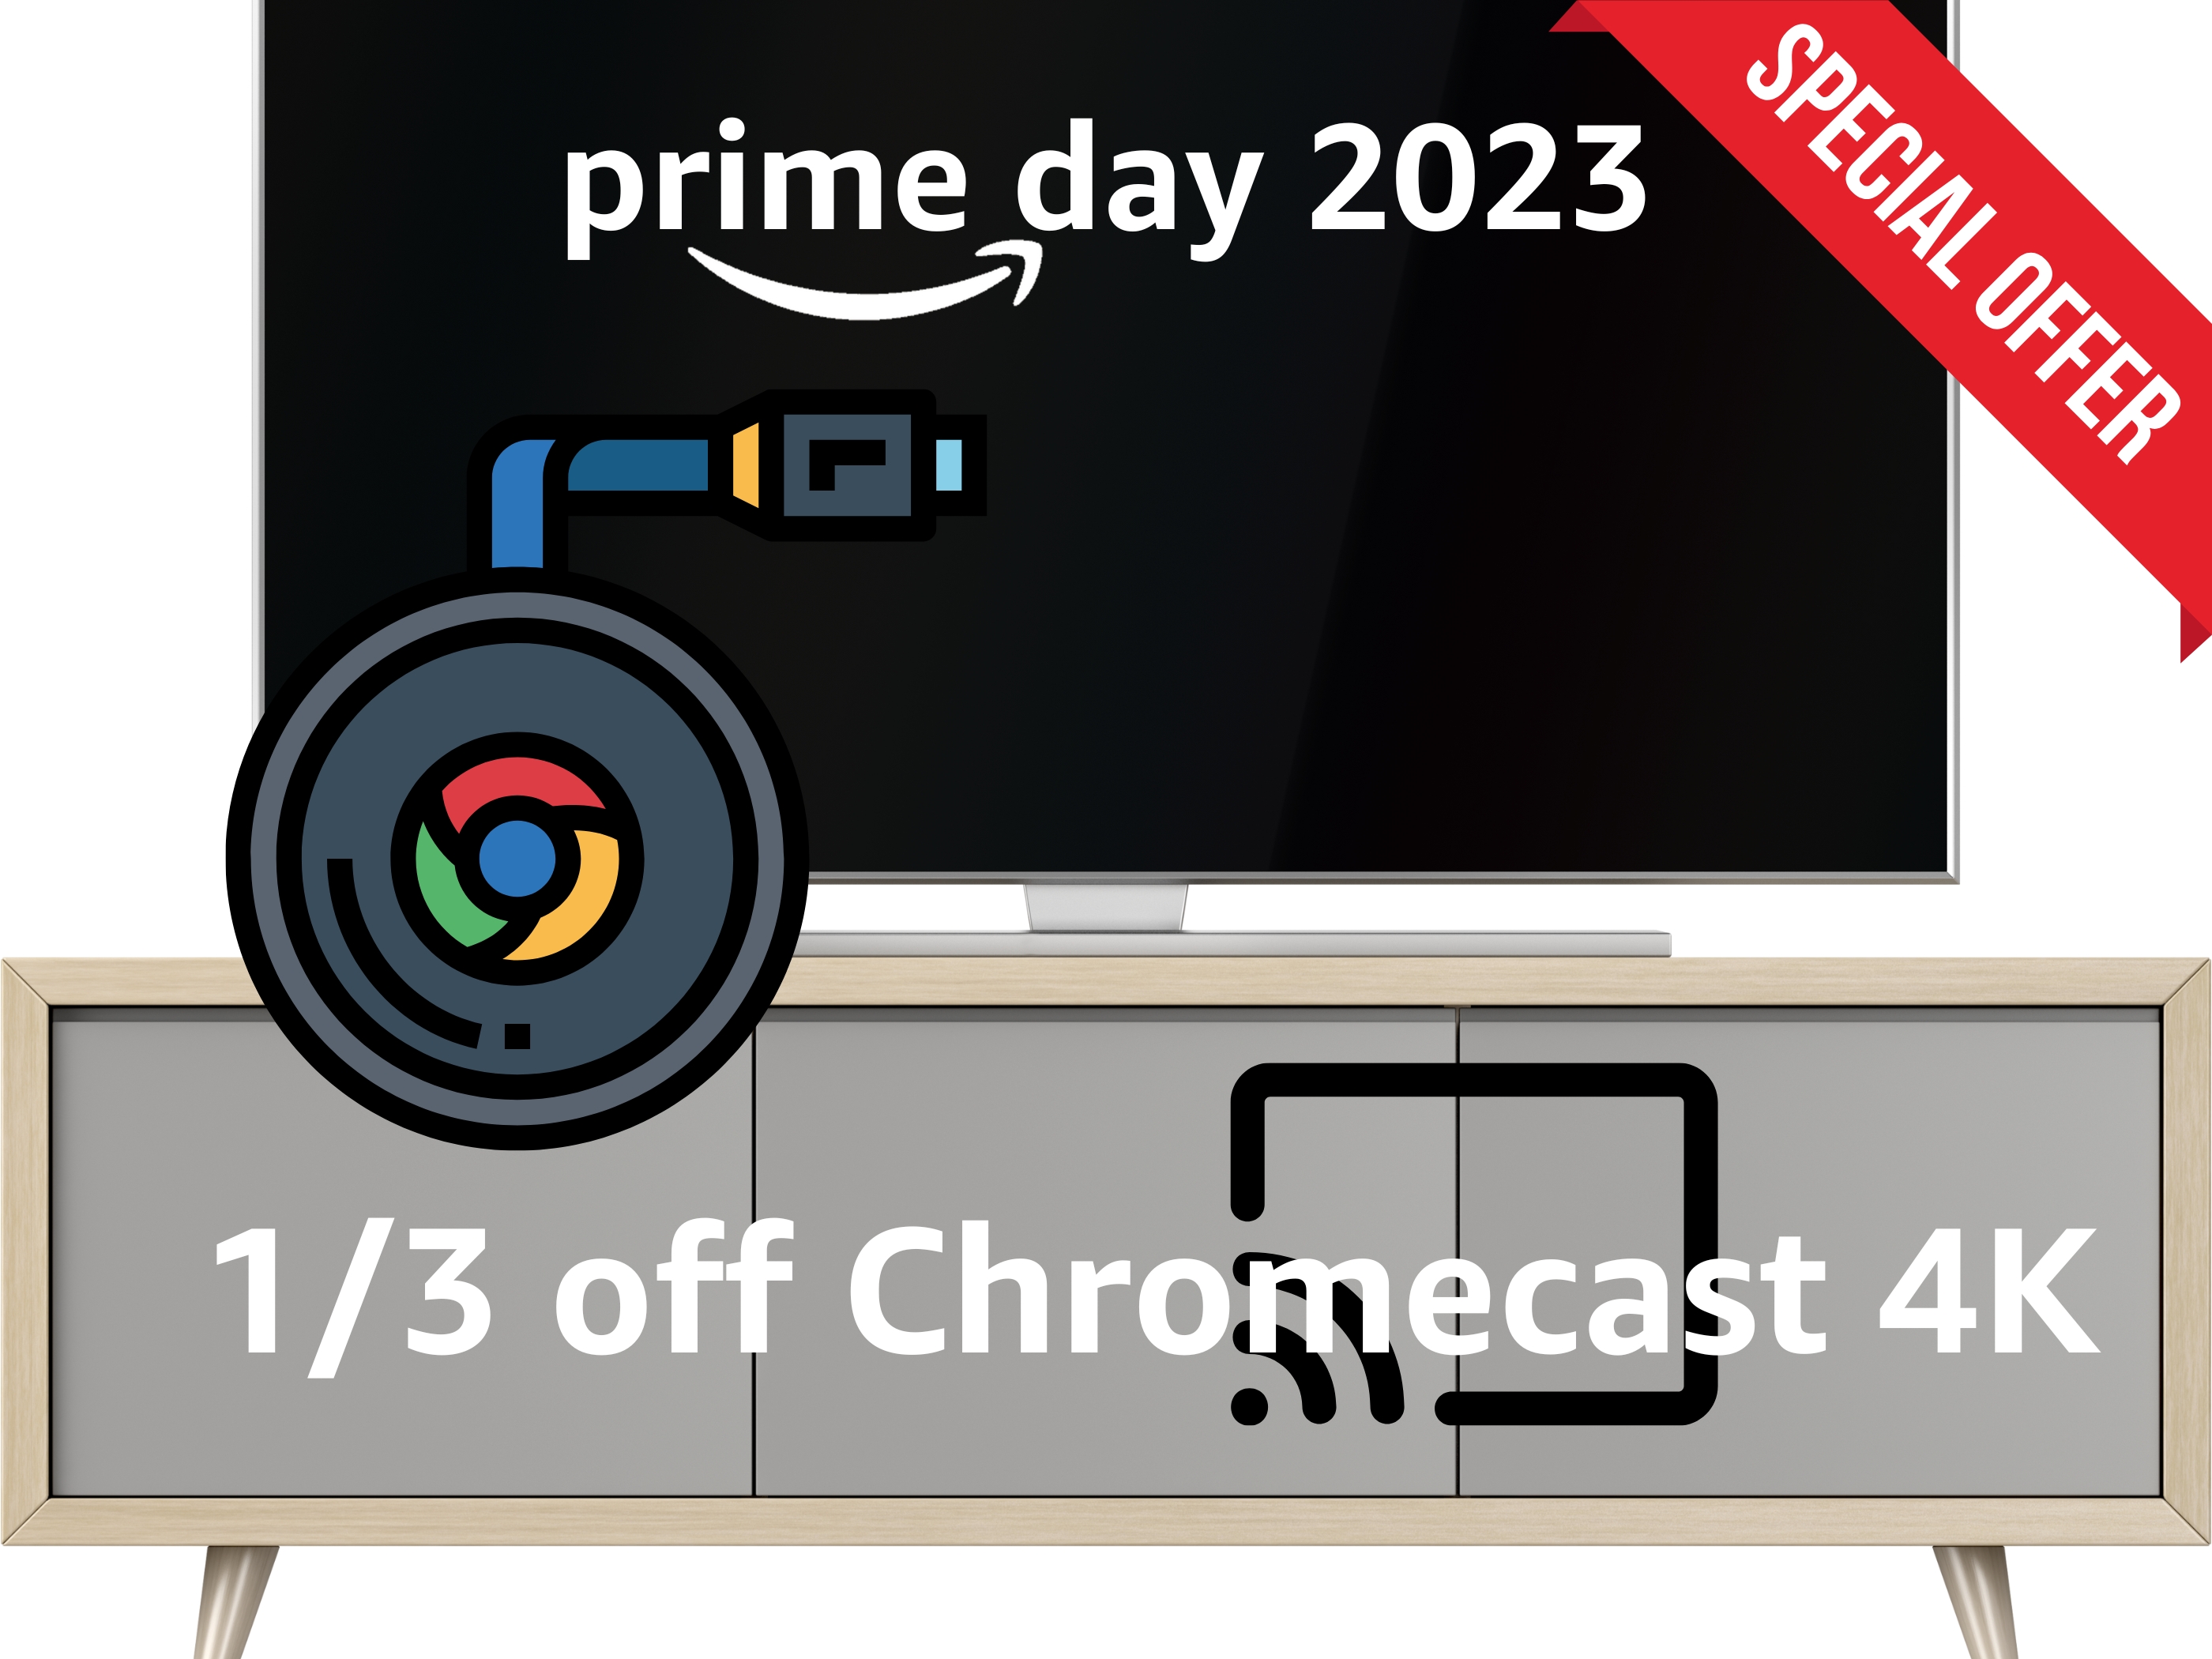 Upgrade your TV for just £40 with this 4K Chromecast deal on Prime Day